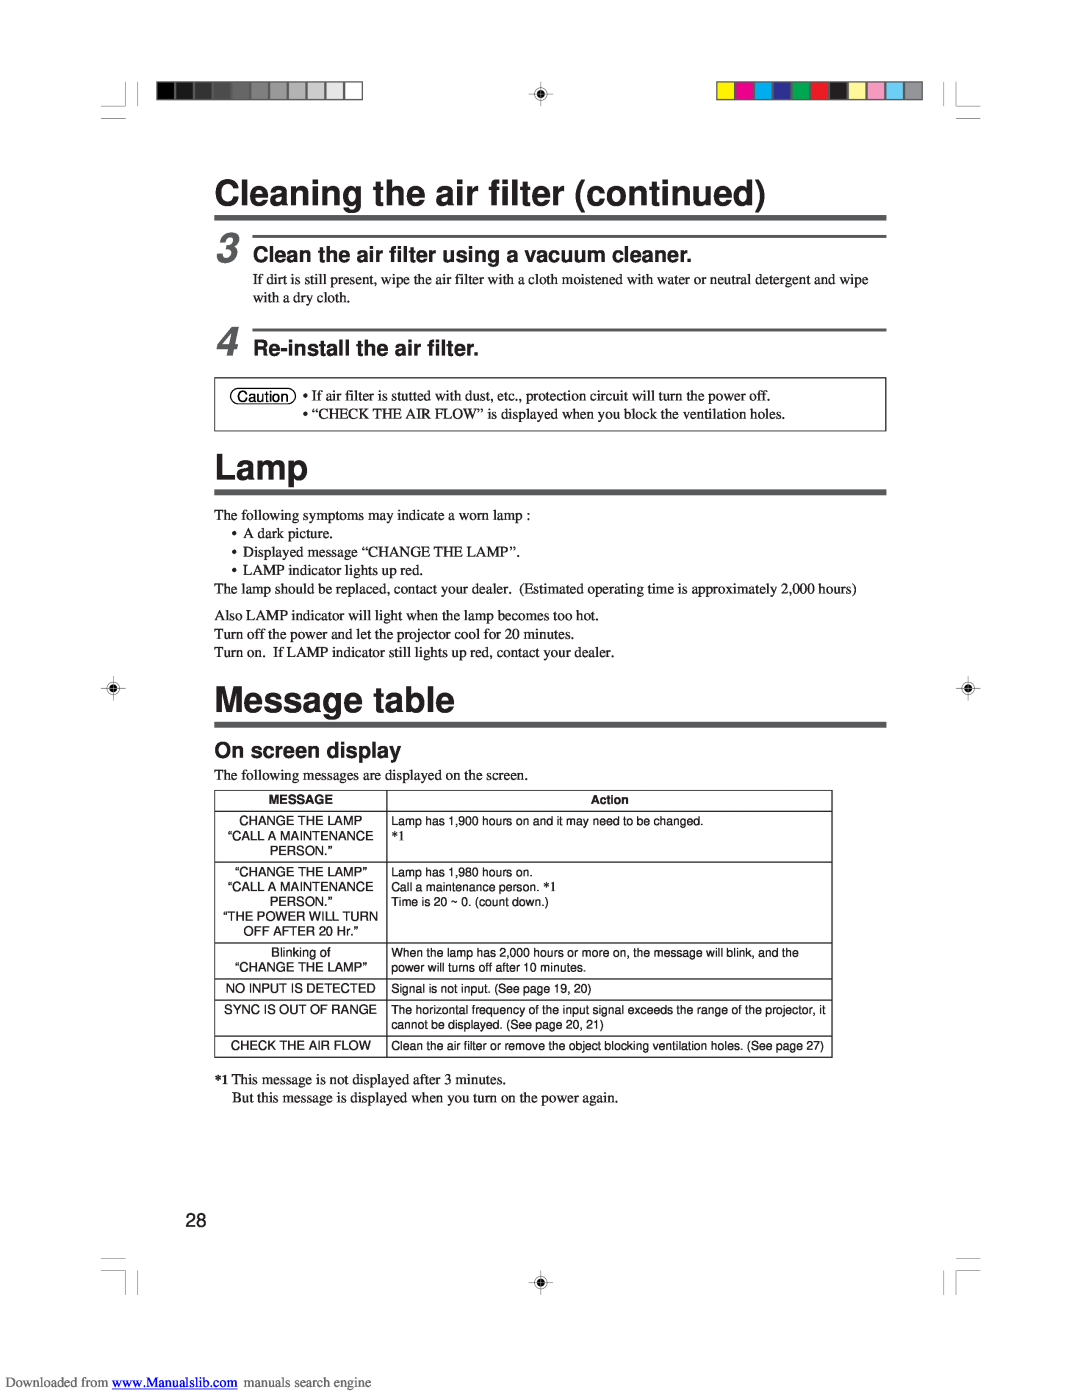 Hitachi CP-X955E Cleaning the air filter continued, Lamp, Message table, Clean the air filter using a vacuum cleaner 